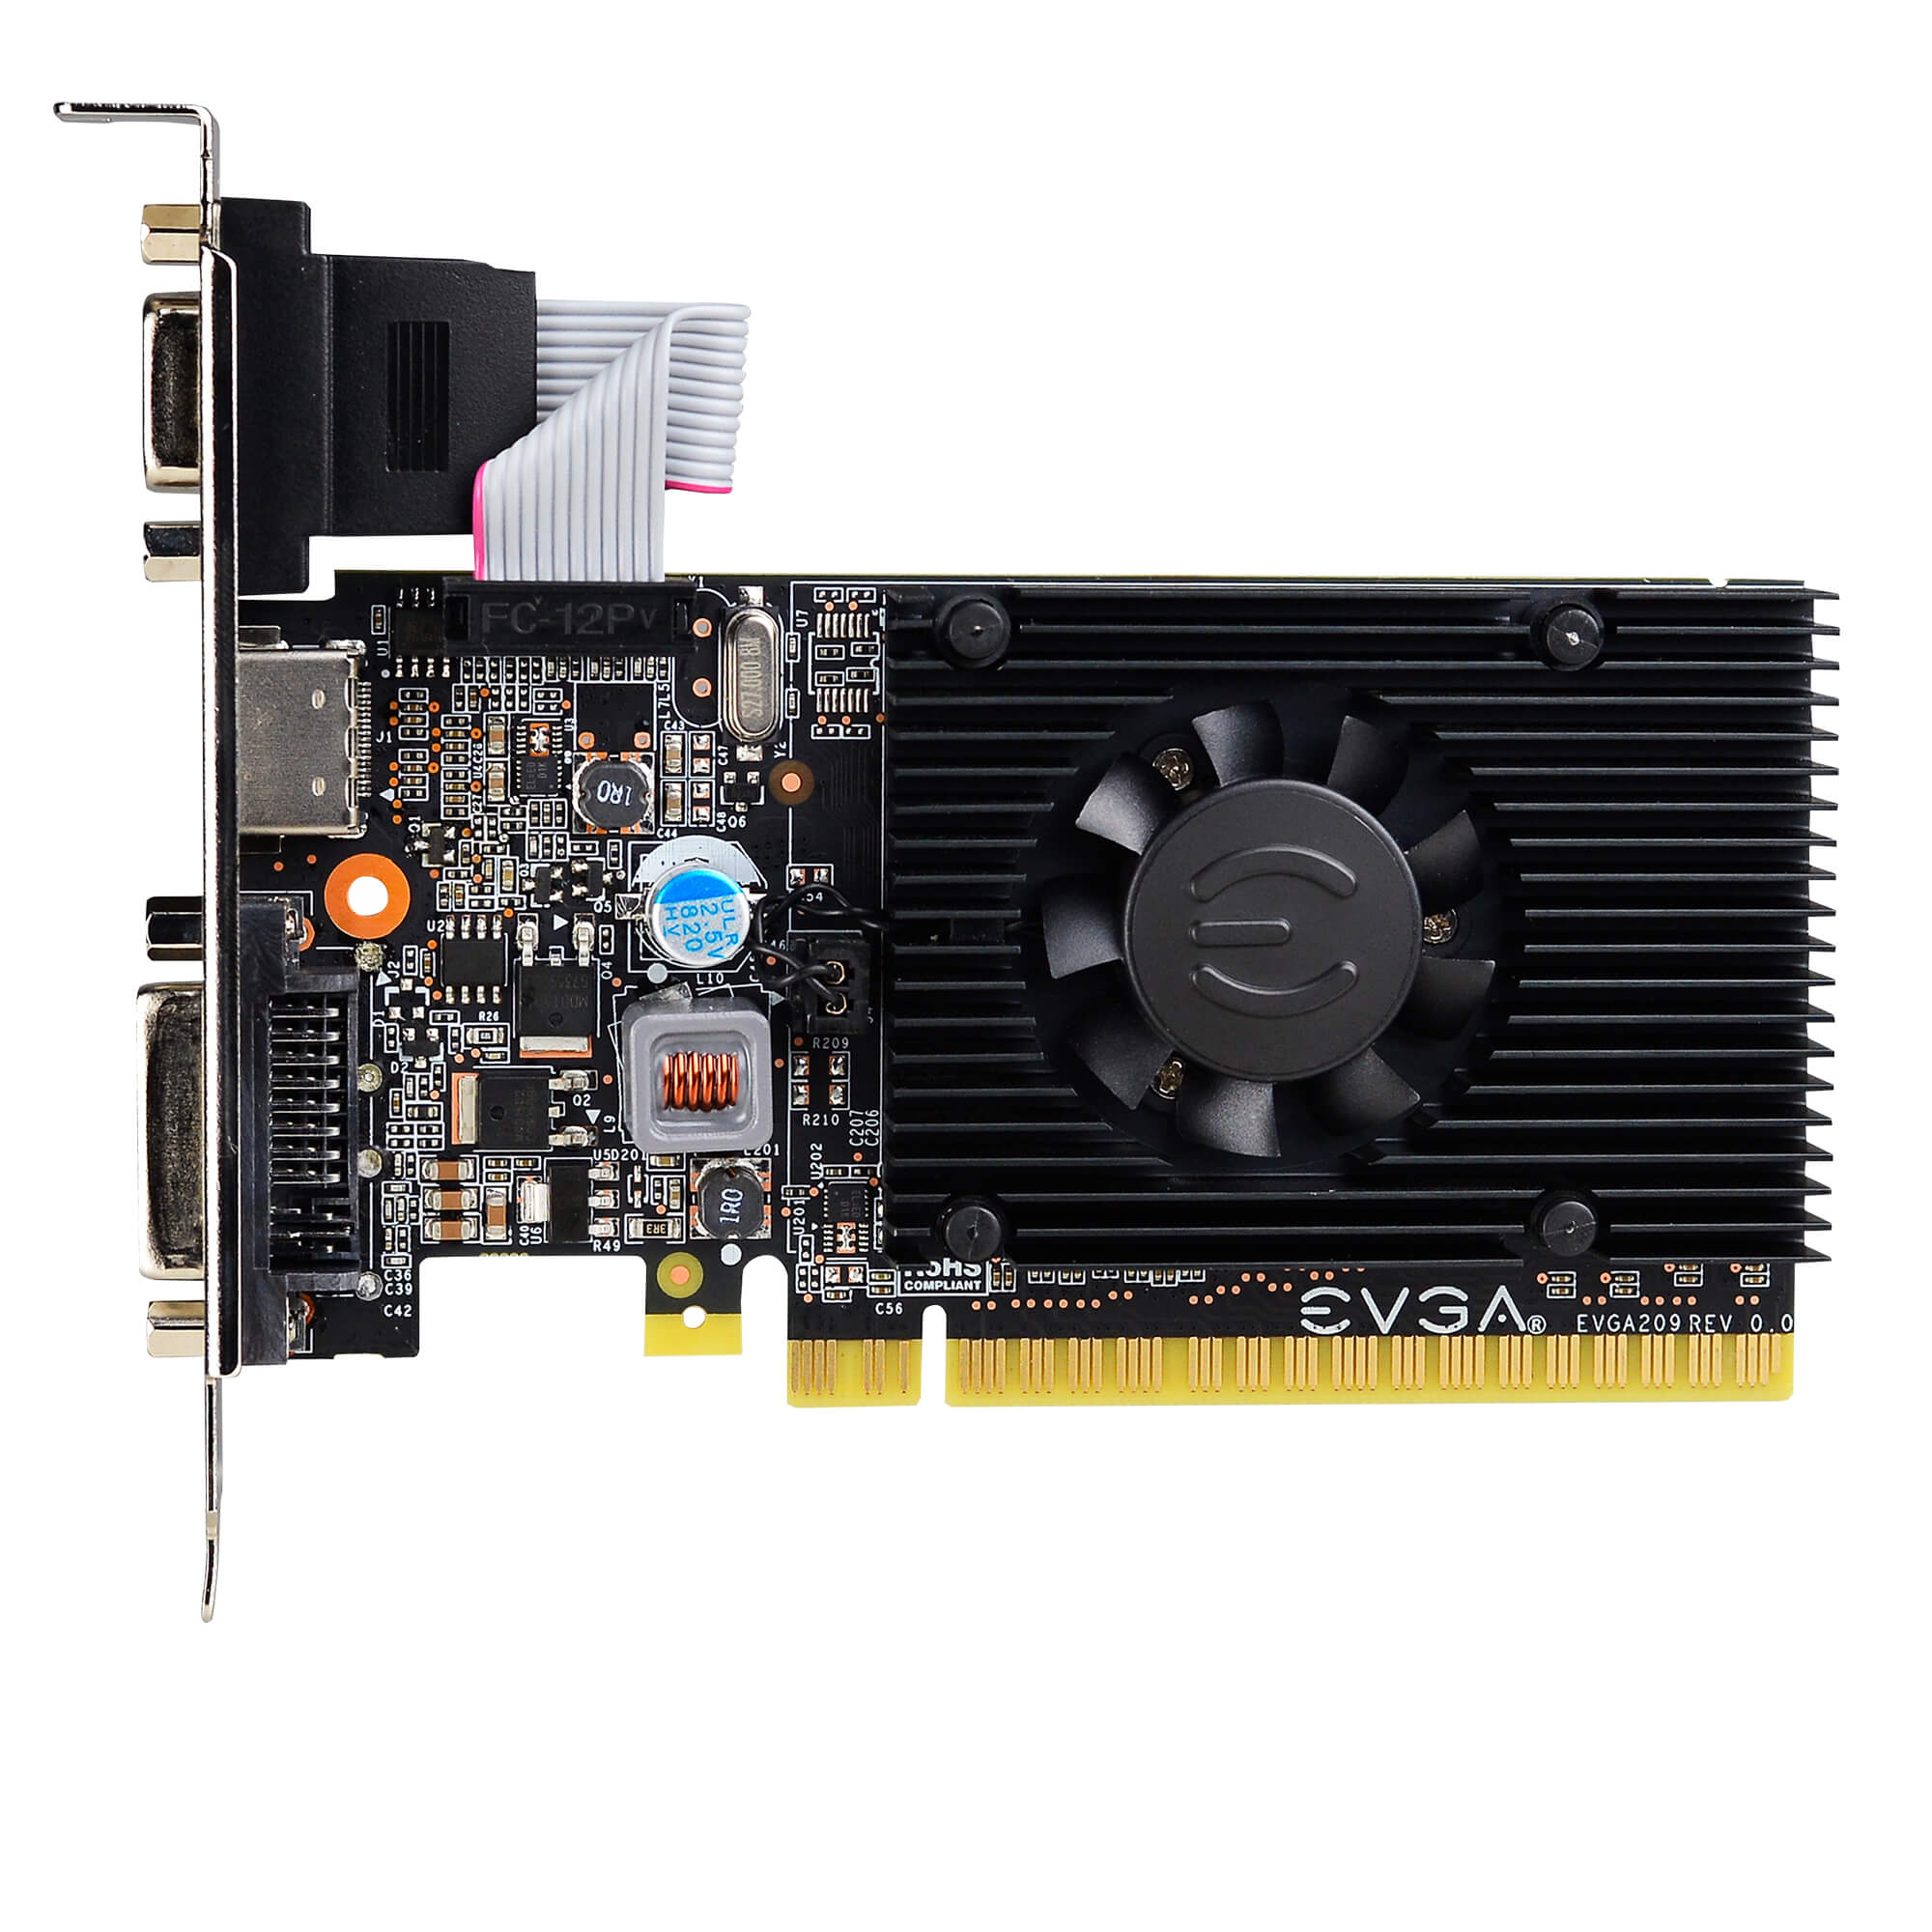 Sparkle GeForce 8400?GS 512?MB ddr3?PCI withネイティブHDMI